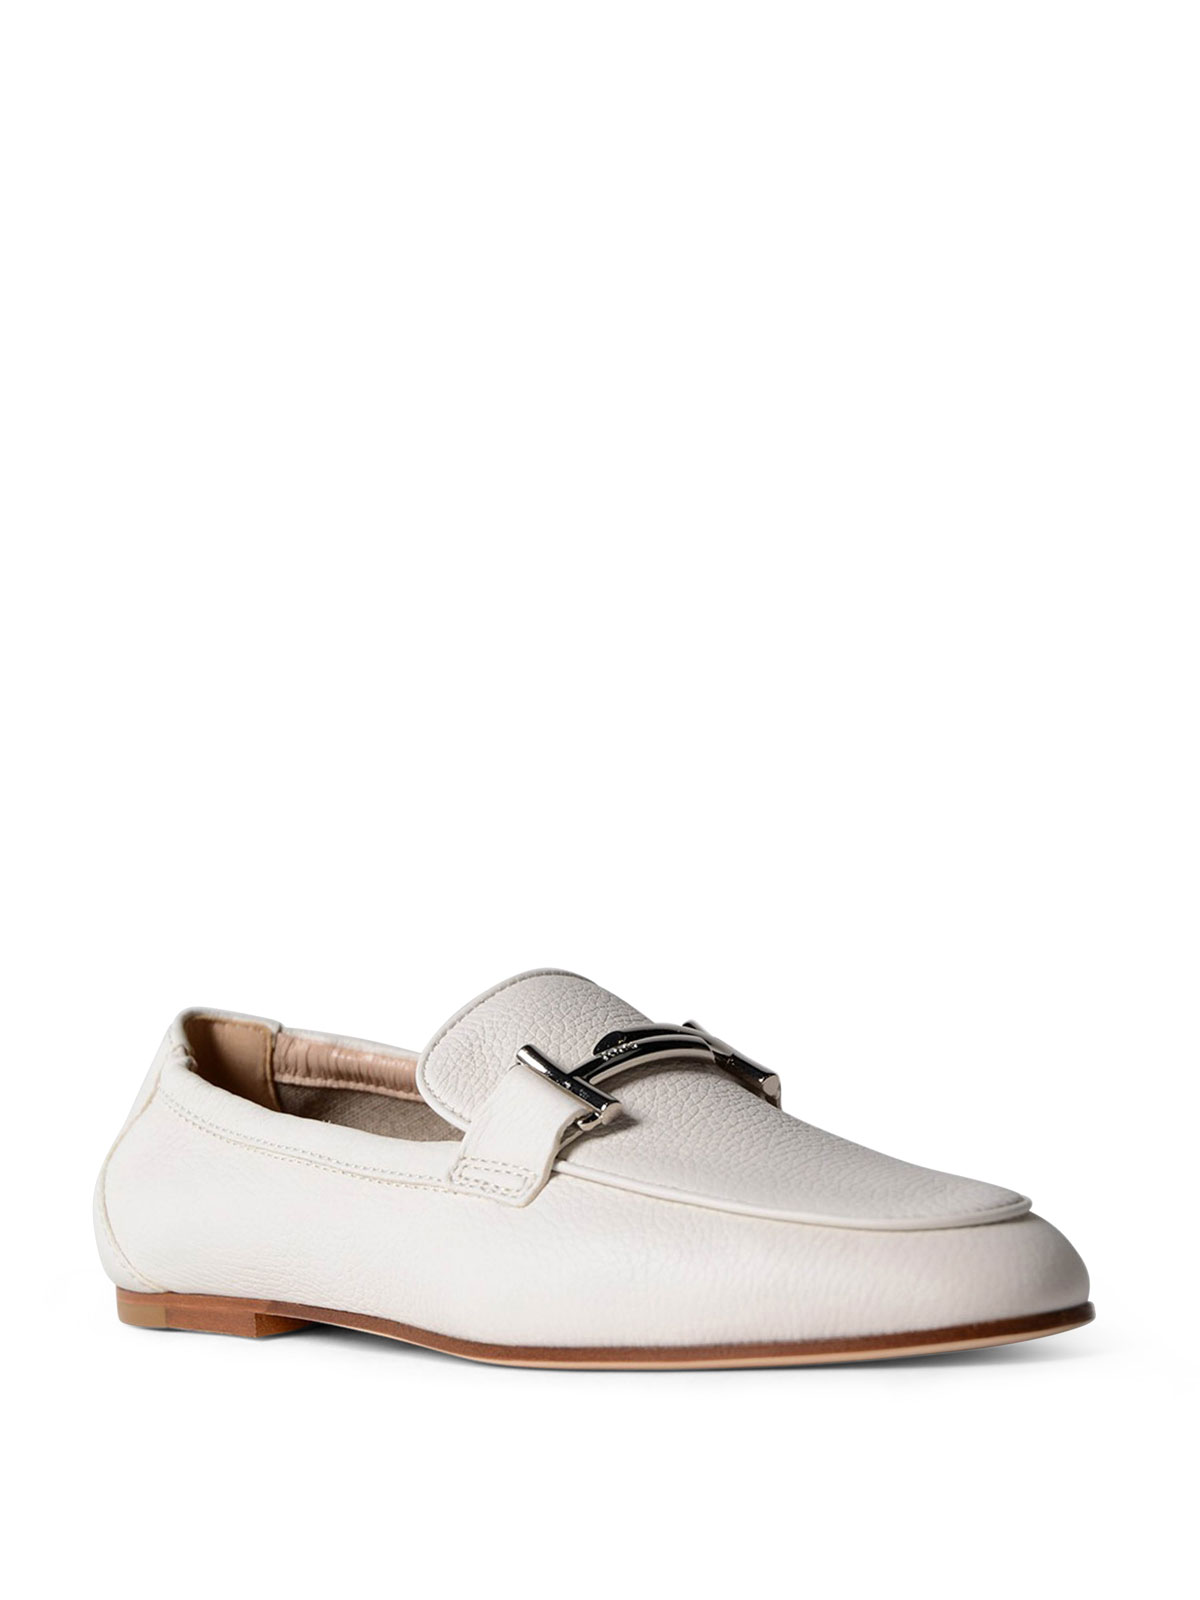 tods white loafers